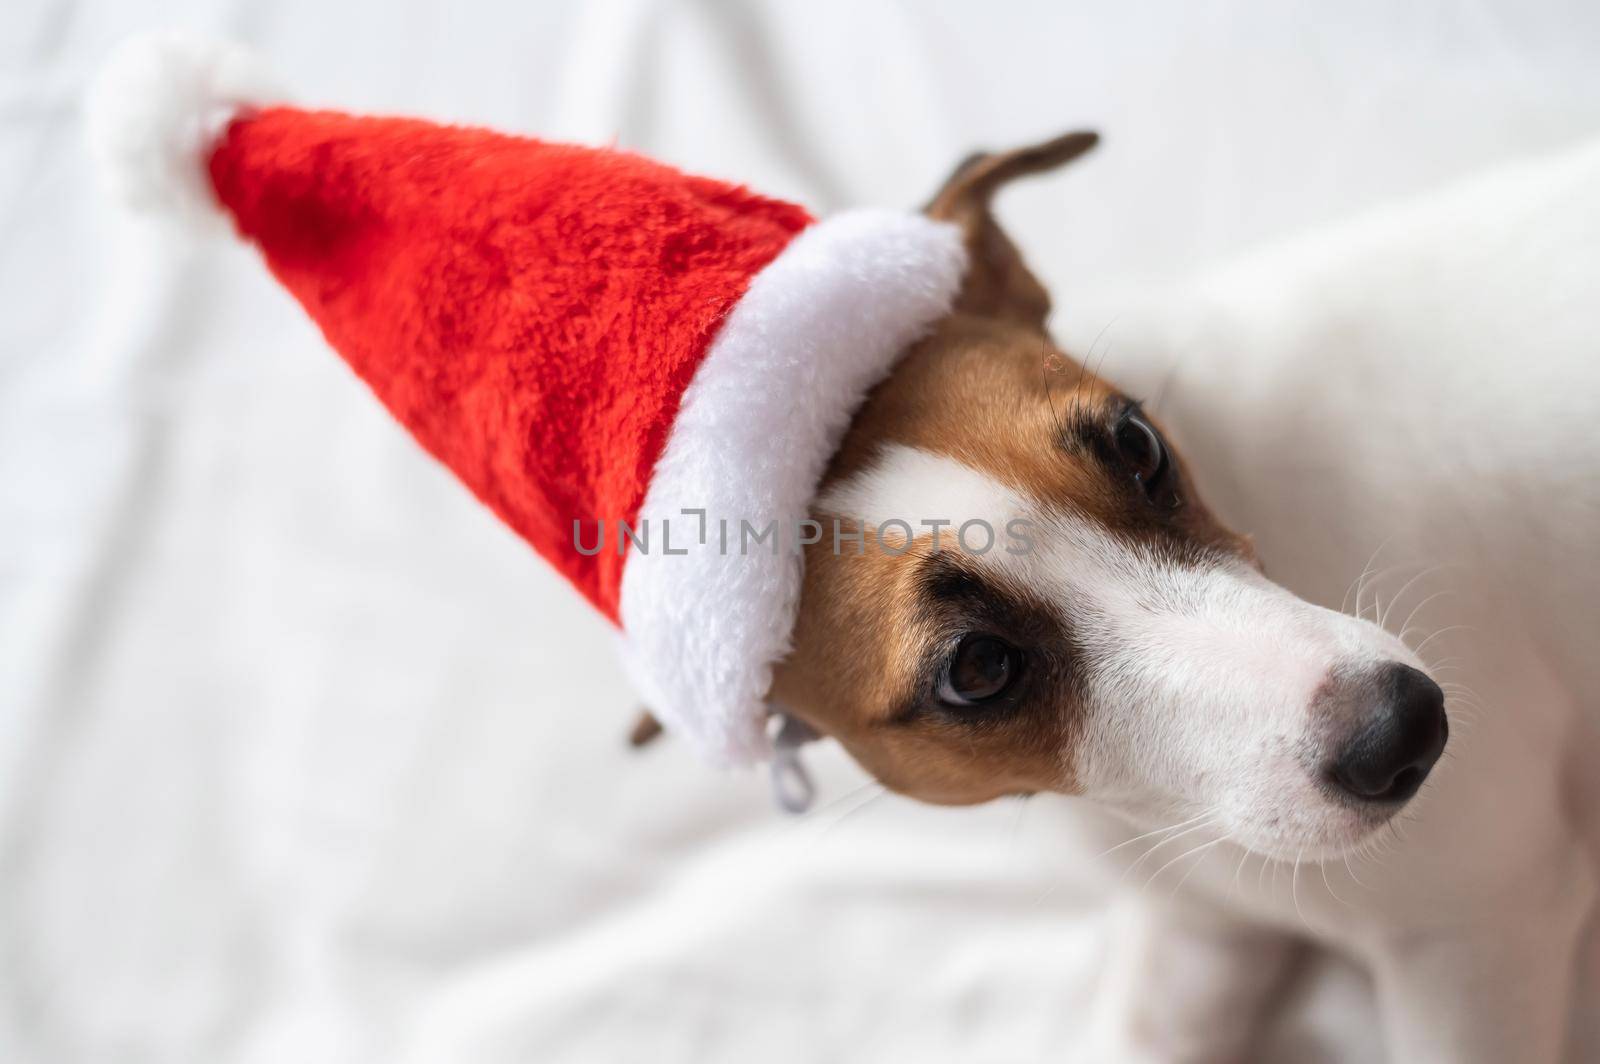 Jack russell terrier dog in santa claus hat lies on a white sheet. Christmas greeting card by mrwed54